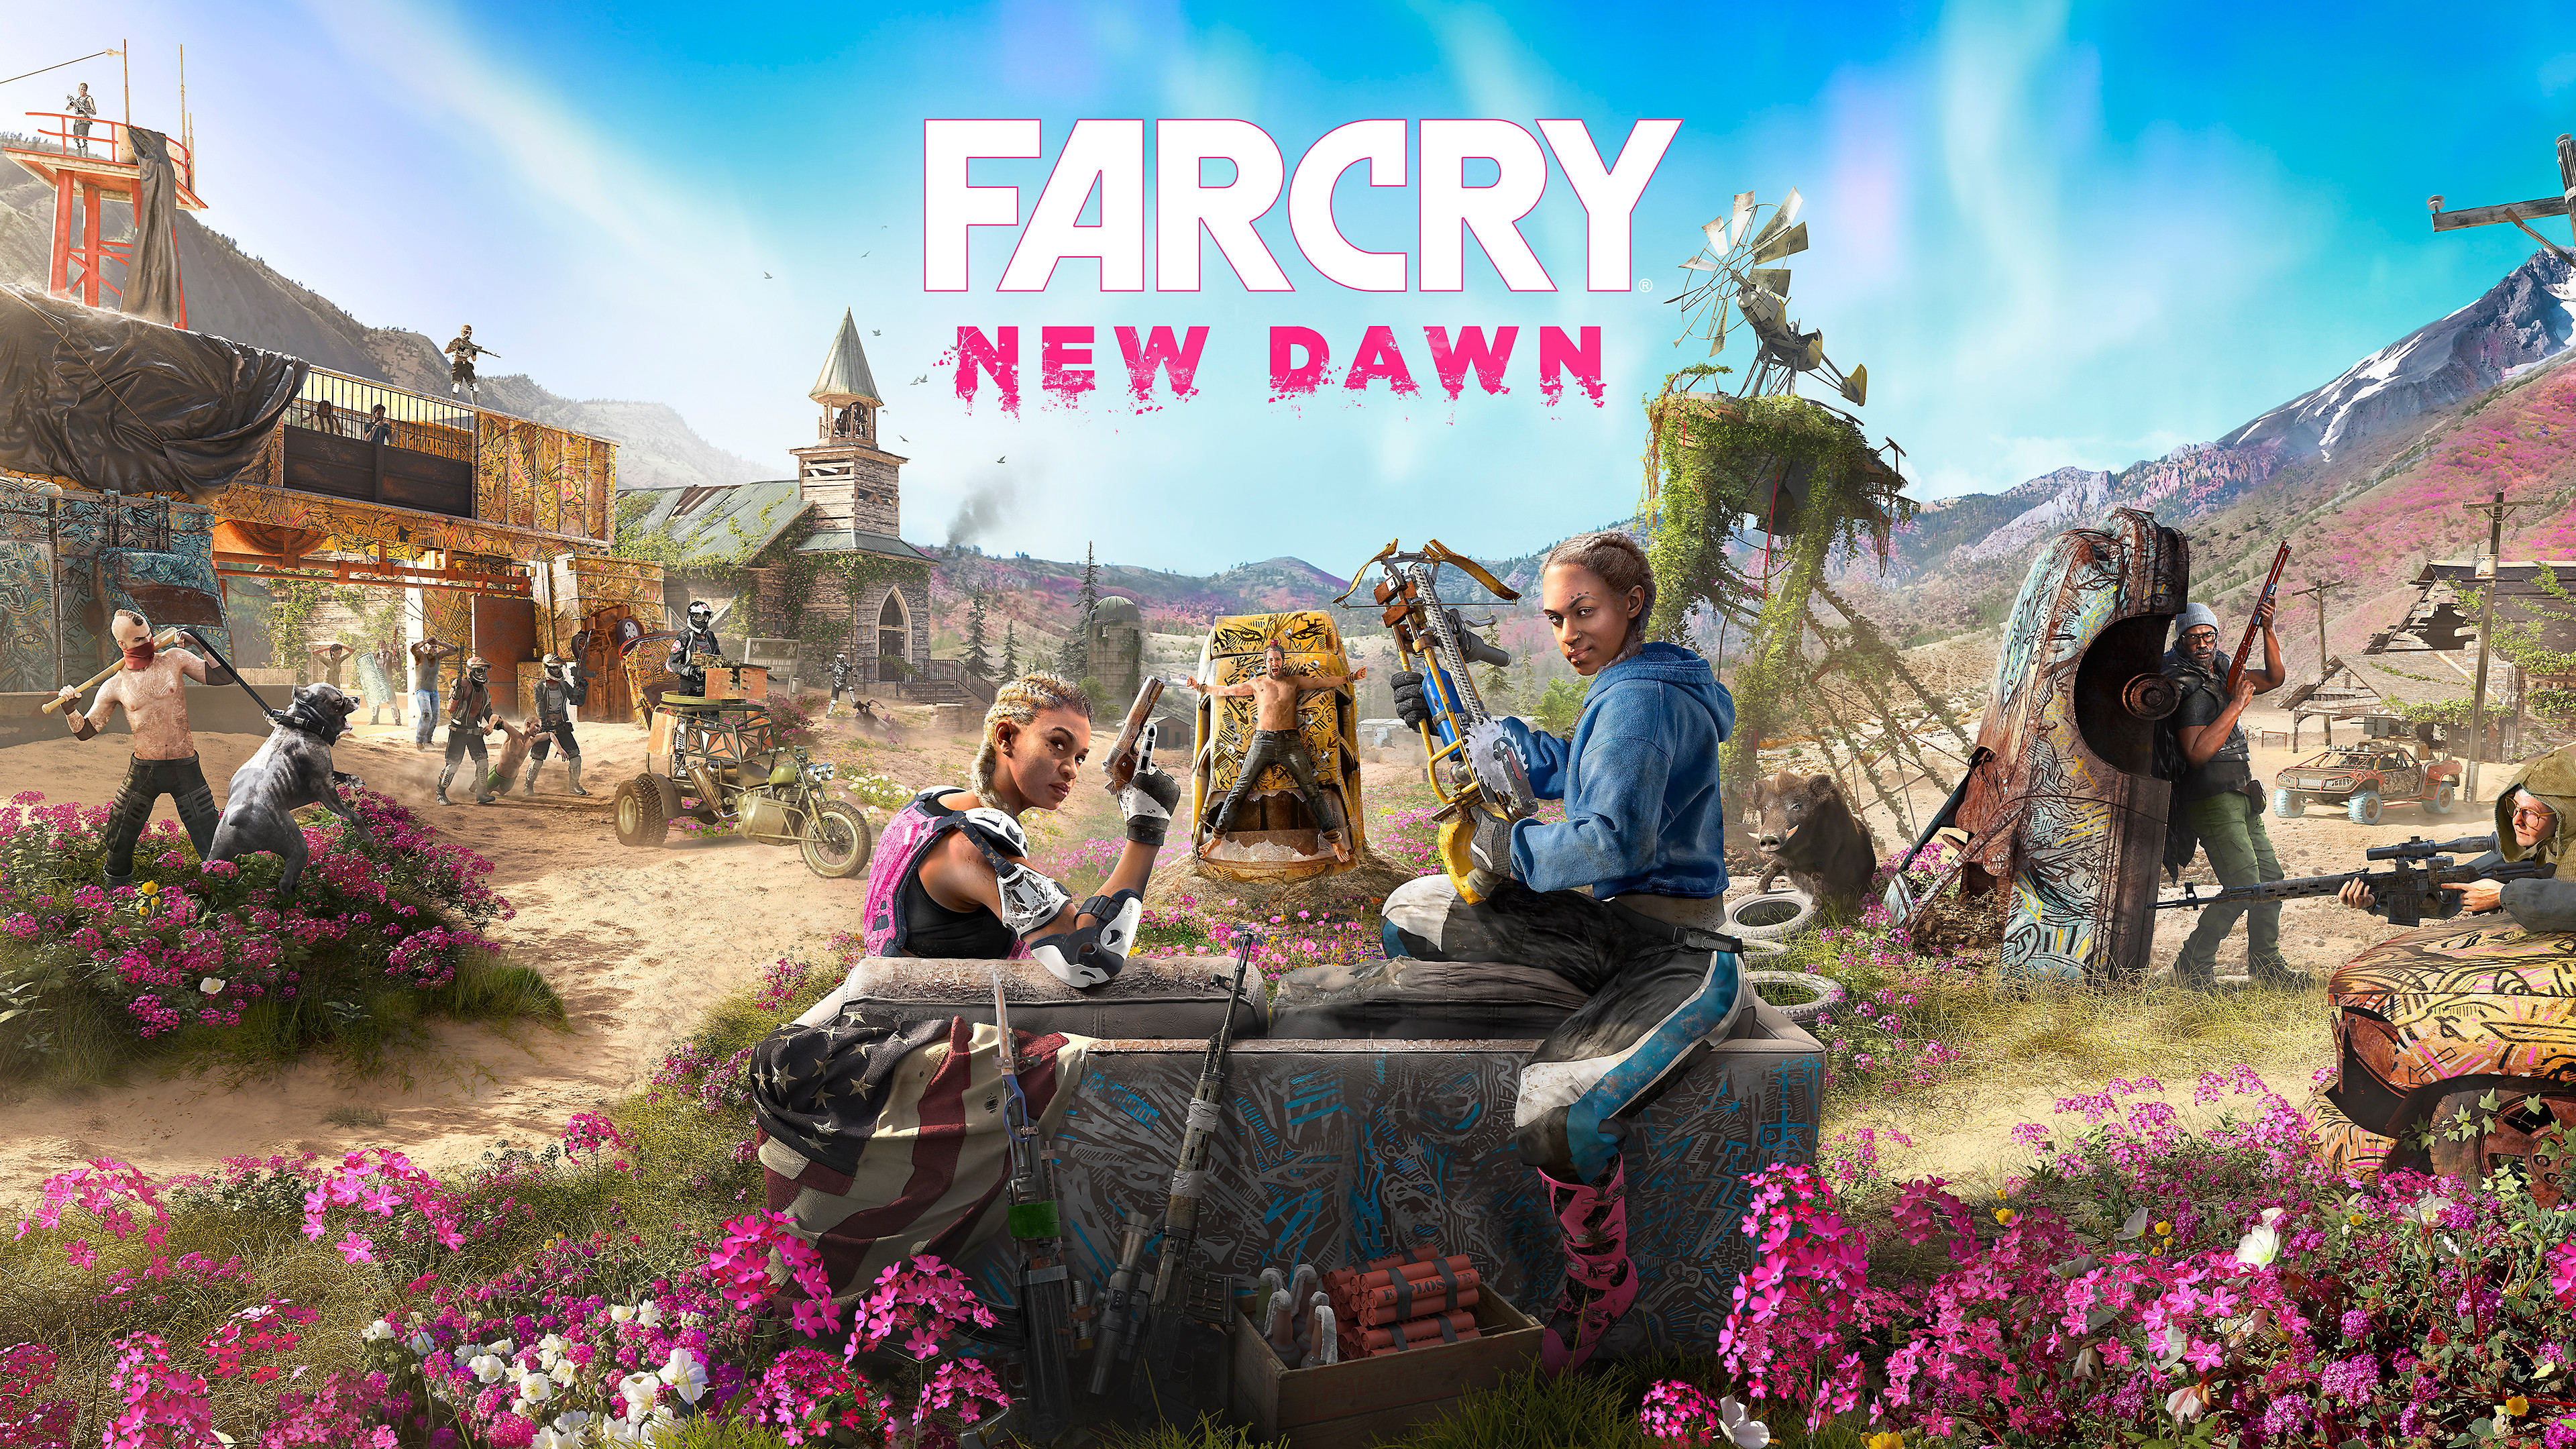 Far Cry New Dawn Cover art 2019 Game 4K Wallpapers